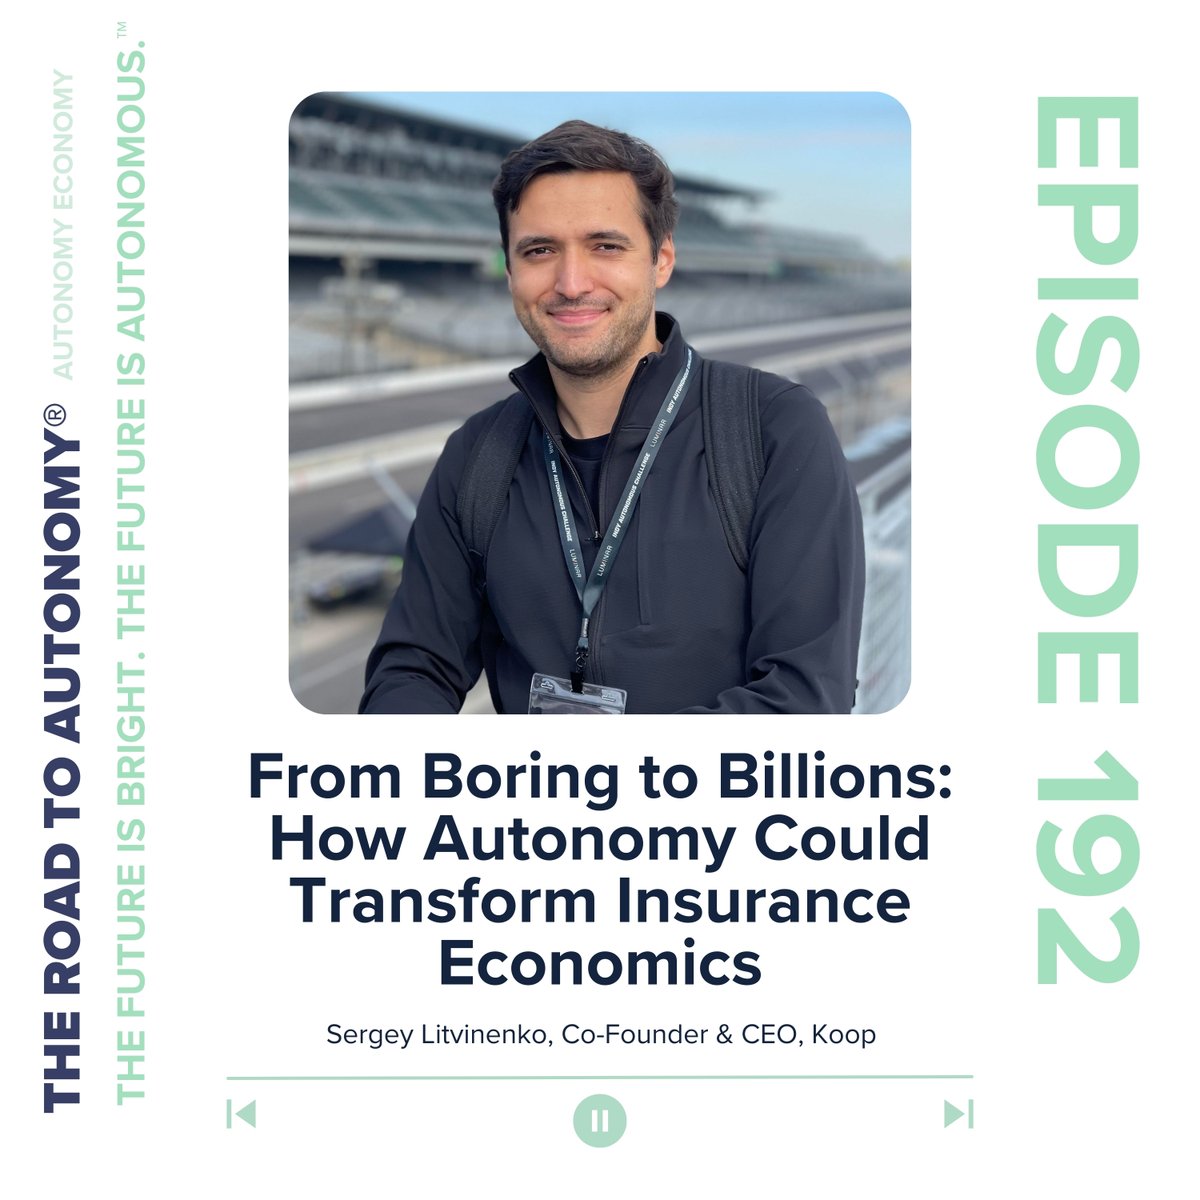 From Boring to Billions: How Autonomy Could Transform Insurance Economics 🎧 Listen on Apple Podcasts: podcasts.apple.com/us/podcast/the… 🎧 Listen on Spotify: open.spotify.com/episode/764jrY… 🎥 Watch on X: x.com/RoadToAutonomy… 🎥 Watch on YouTube: youtu.be/-JGRaZ14eNo?si…